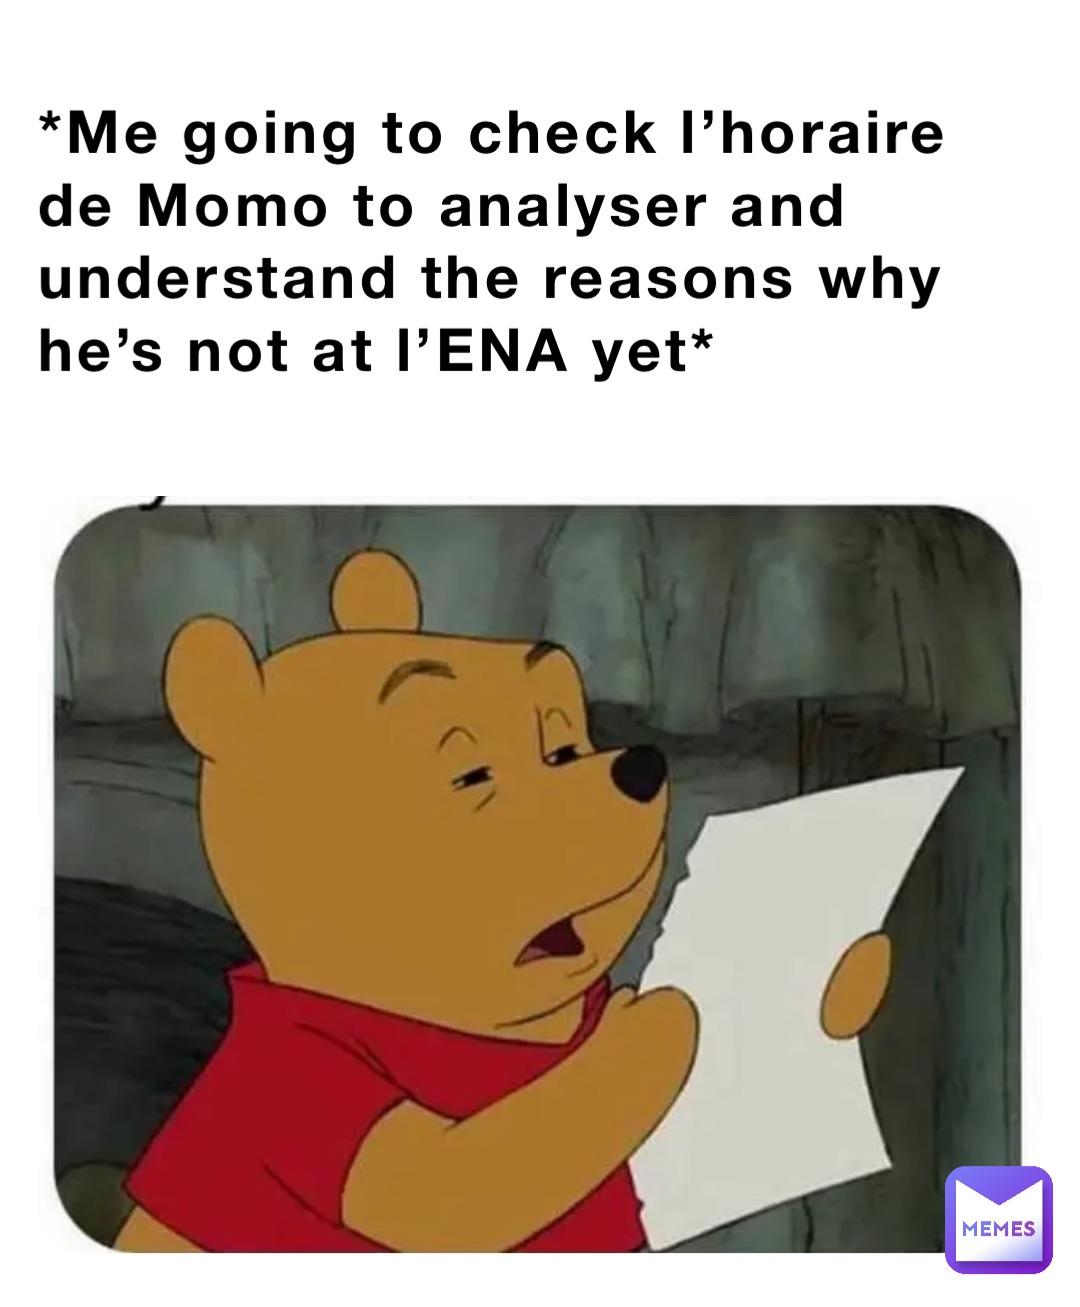 *Me going to check l’horaire de Momo to analyser and understand the reasons why he’s not at l’ENA yet*